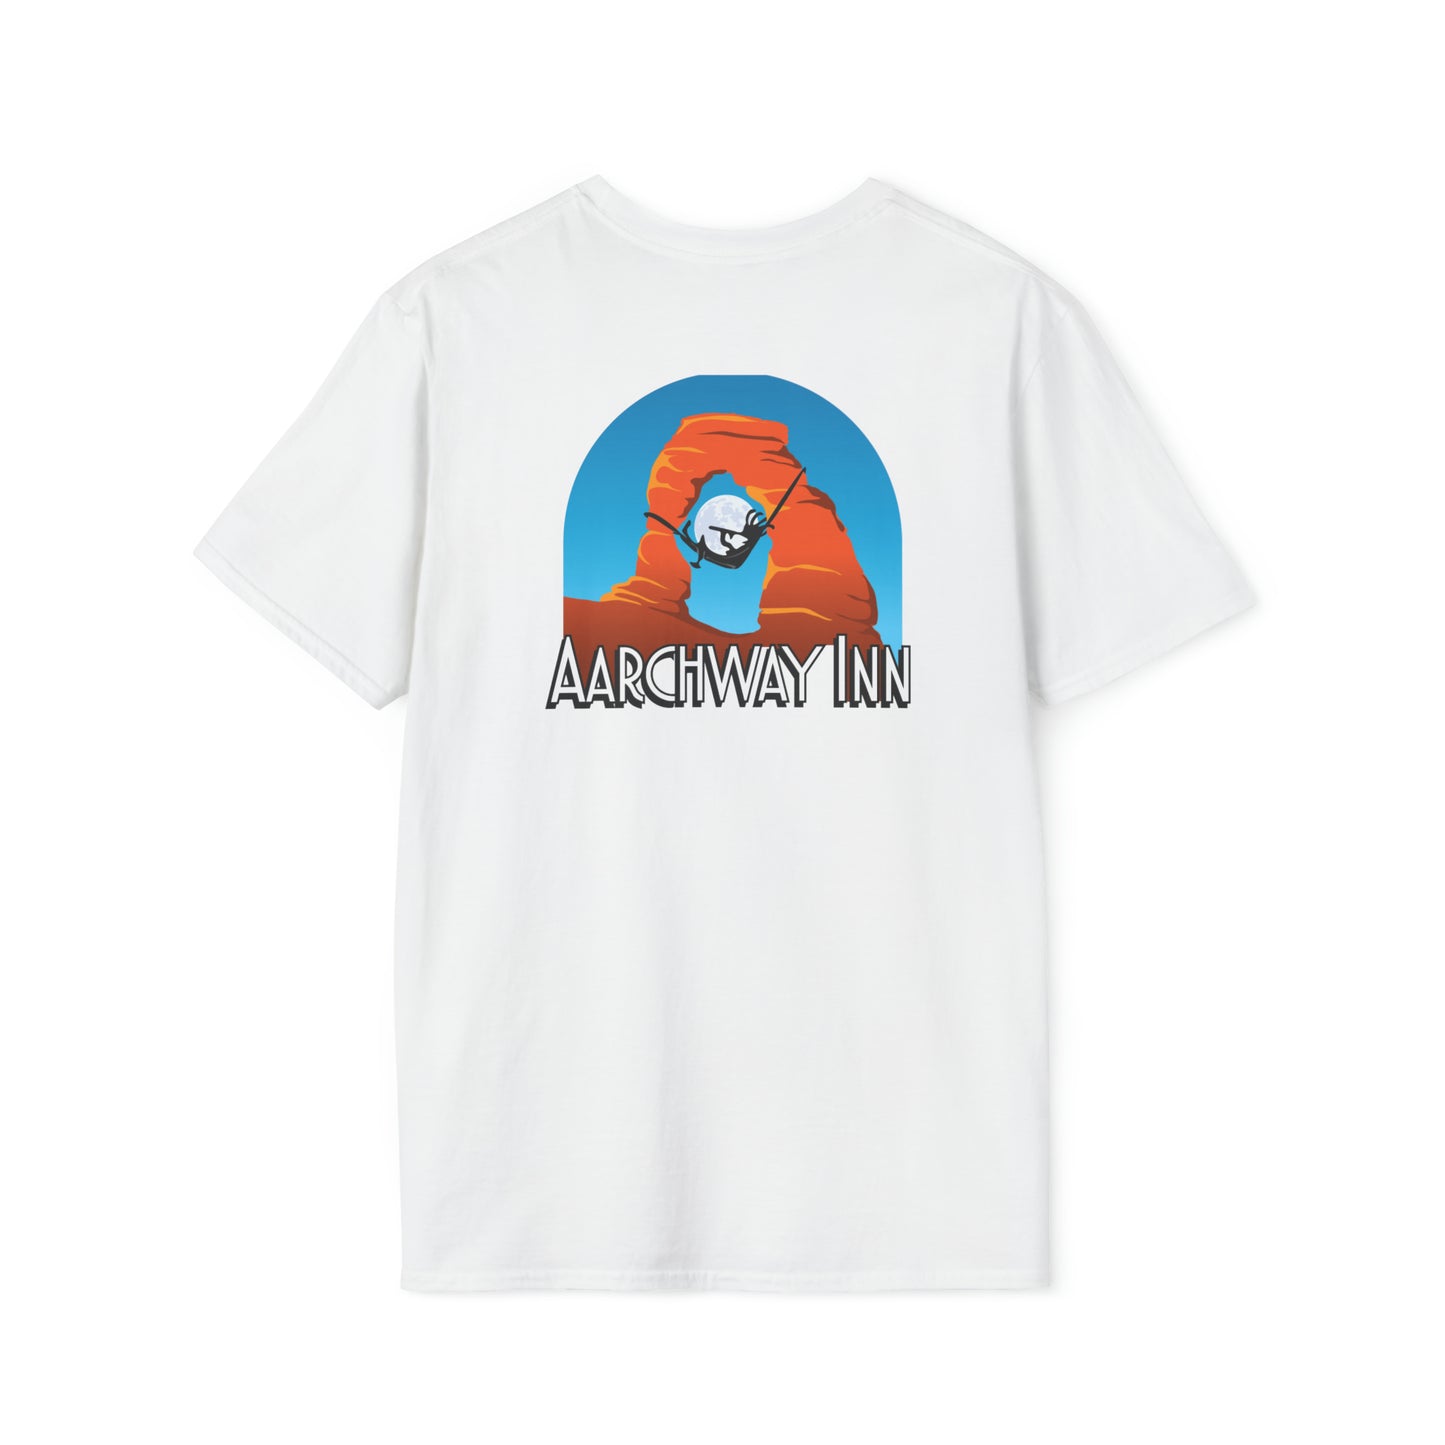 Aarchway- T-Shirt